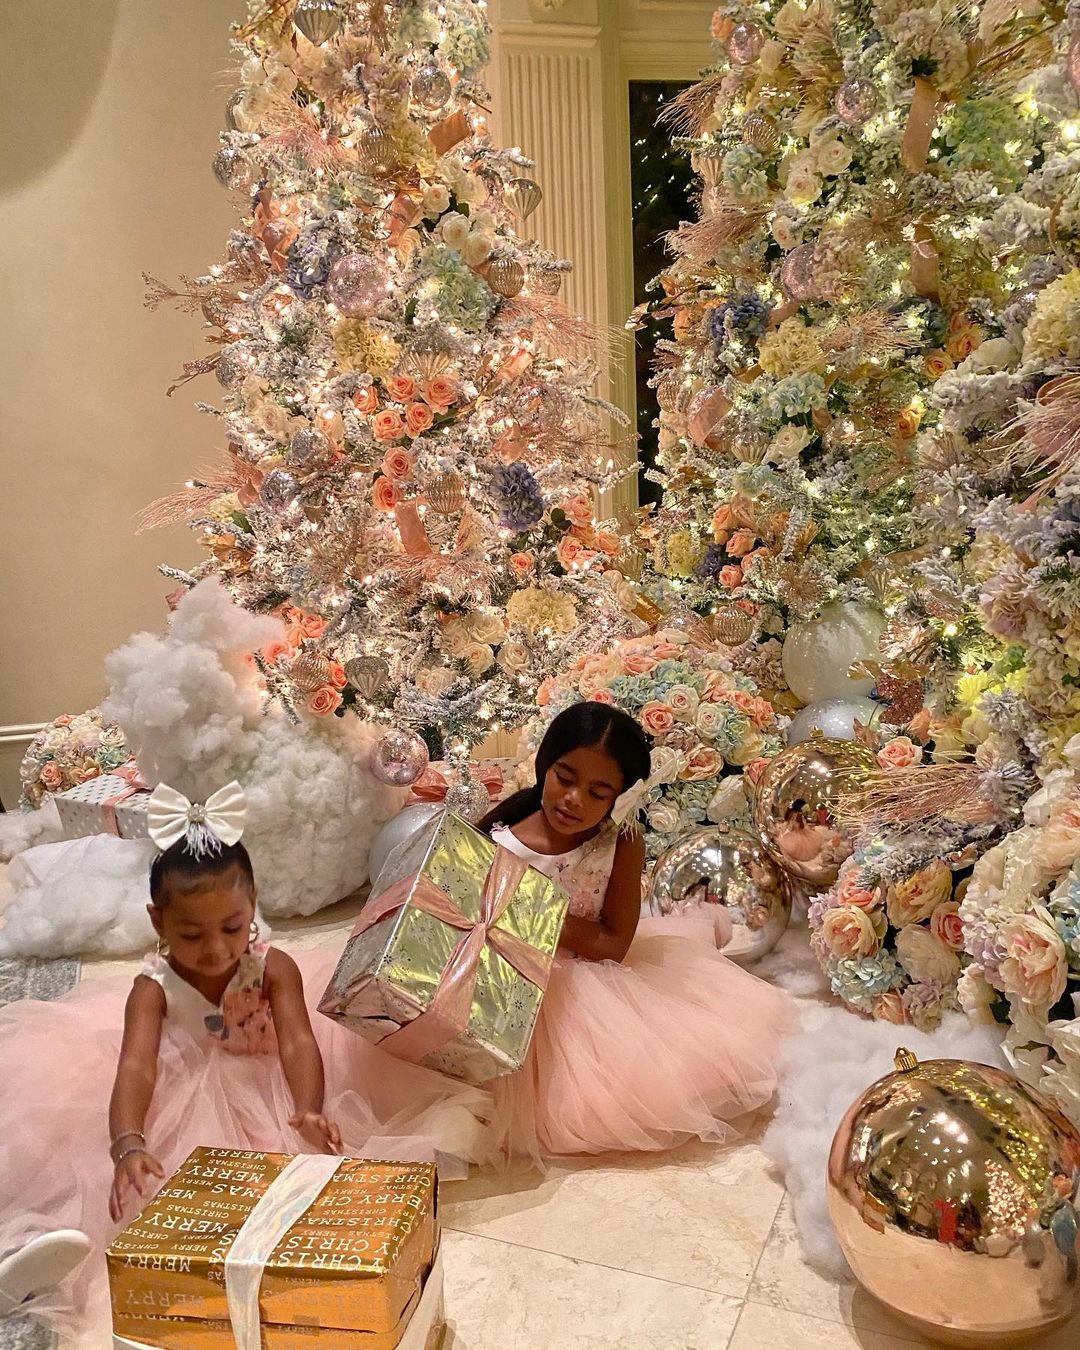 Cardi B enjoys Christmas with her family and new puppy